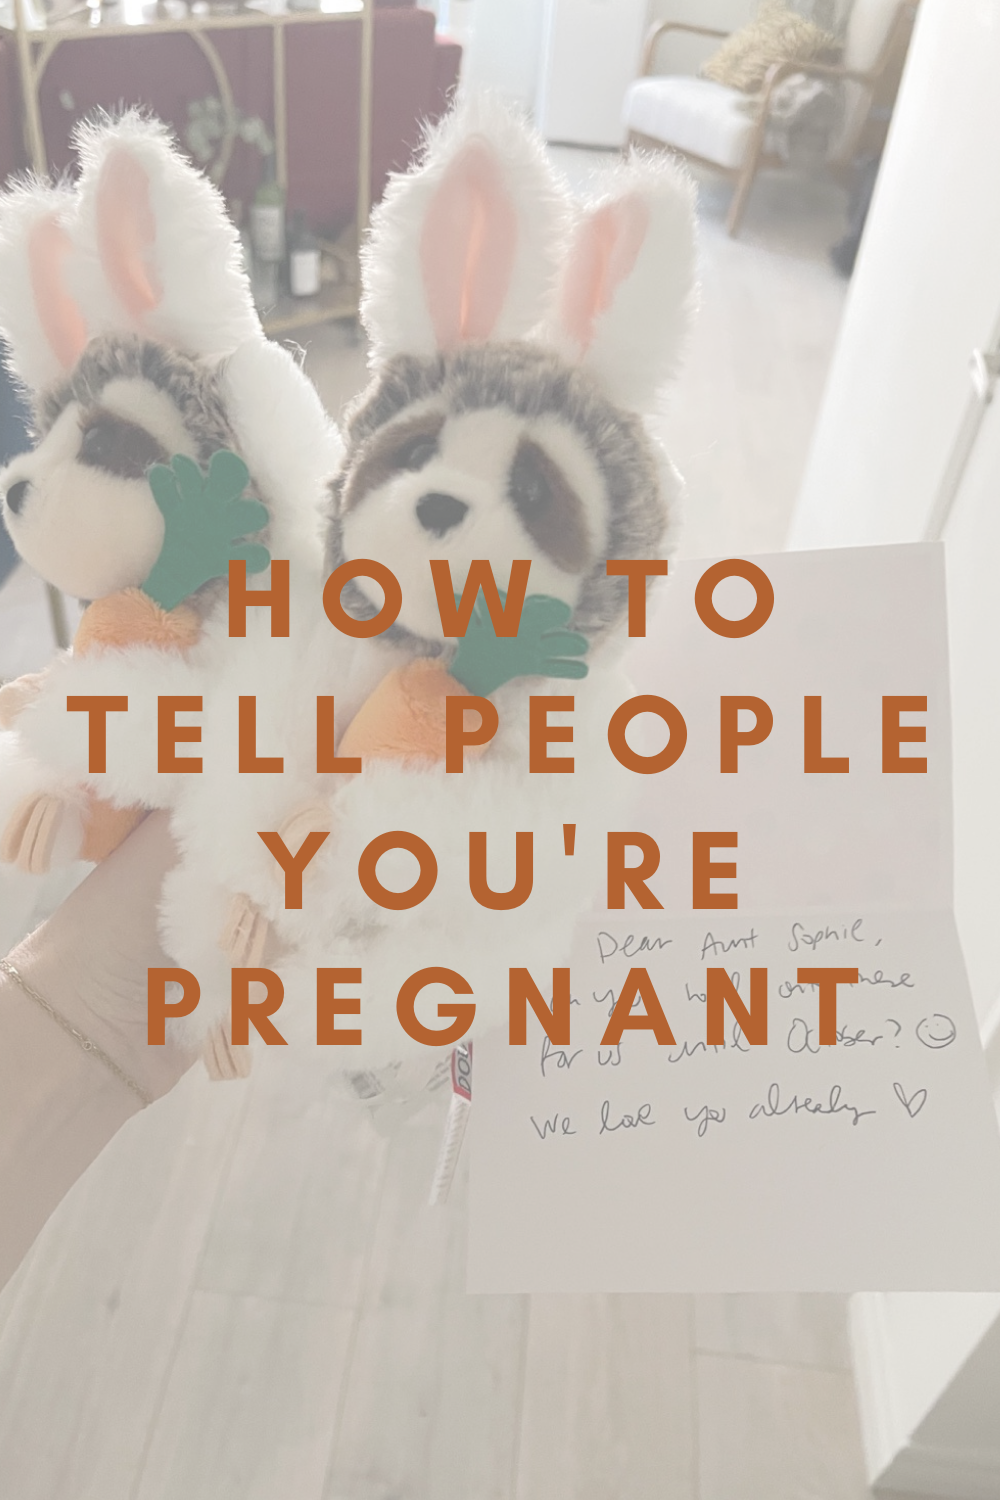 how to tell people you're pregnant, pregnancy announcement ideas, unique ways to say you're pregnant, how to tell people you're expecting, cute and unique ideas ways to tell people you're having a baby, twin pregnancy announcement, di di twins, lmen…